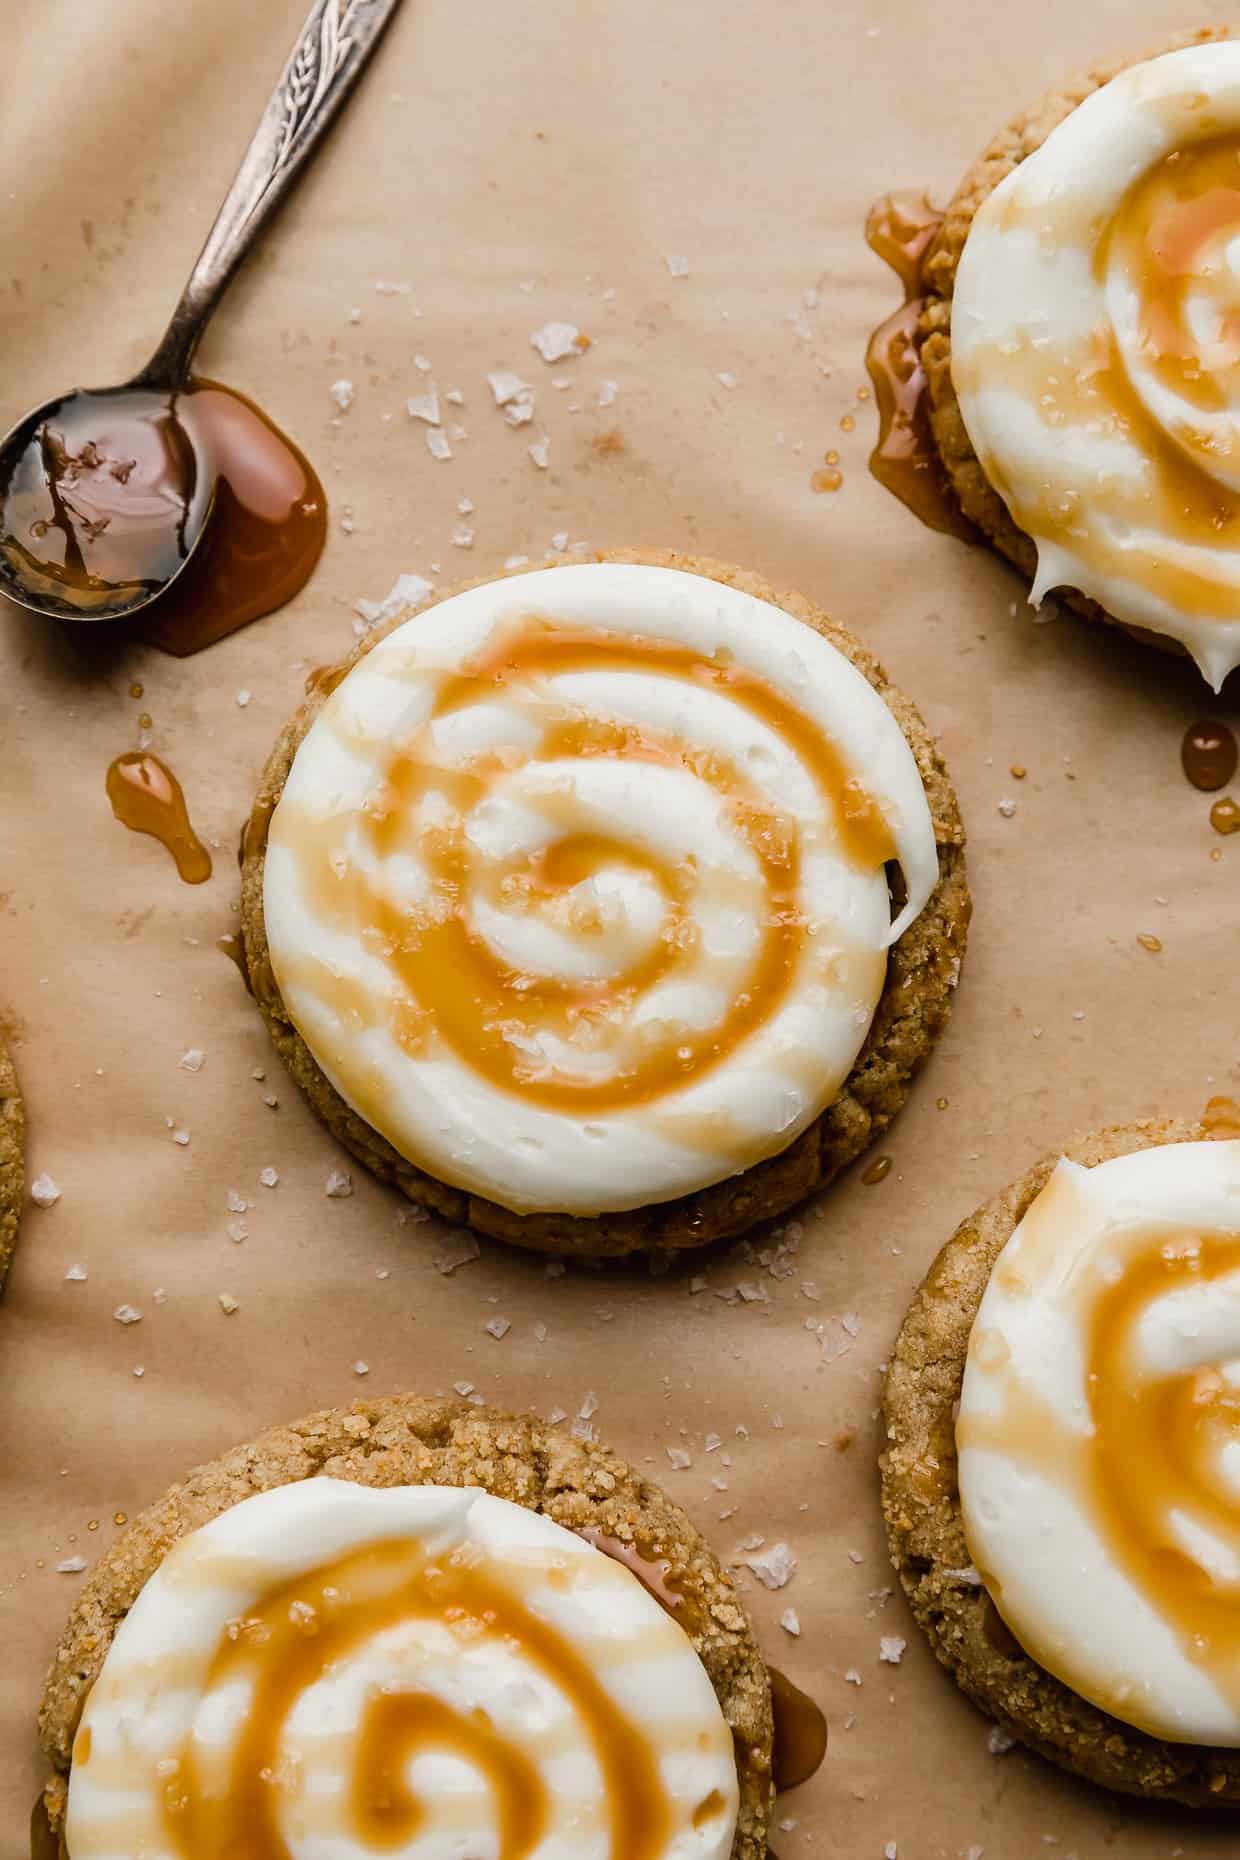 A Crumbl Salted Caramel Cheesecake Cookie topped with cream cheese frosting and caramel on a tan background.